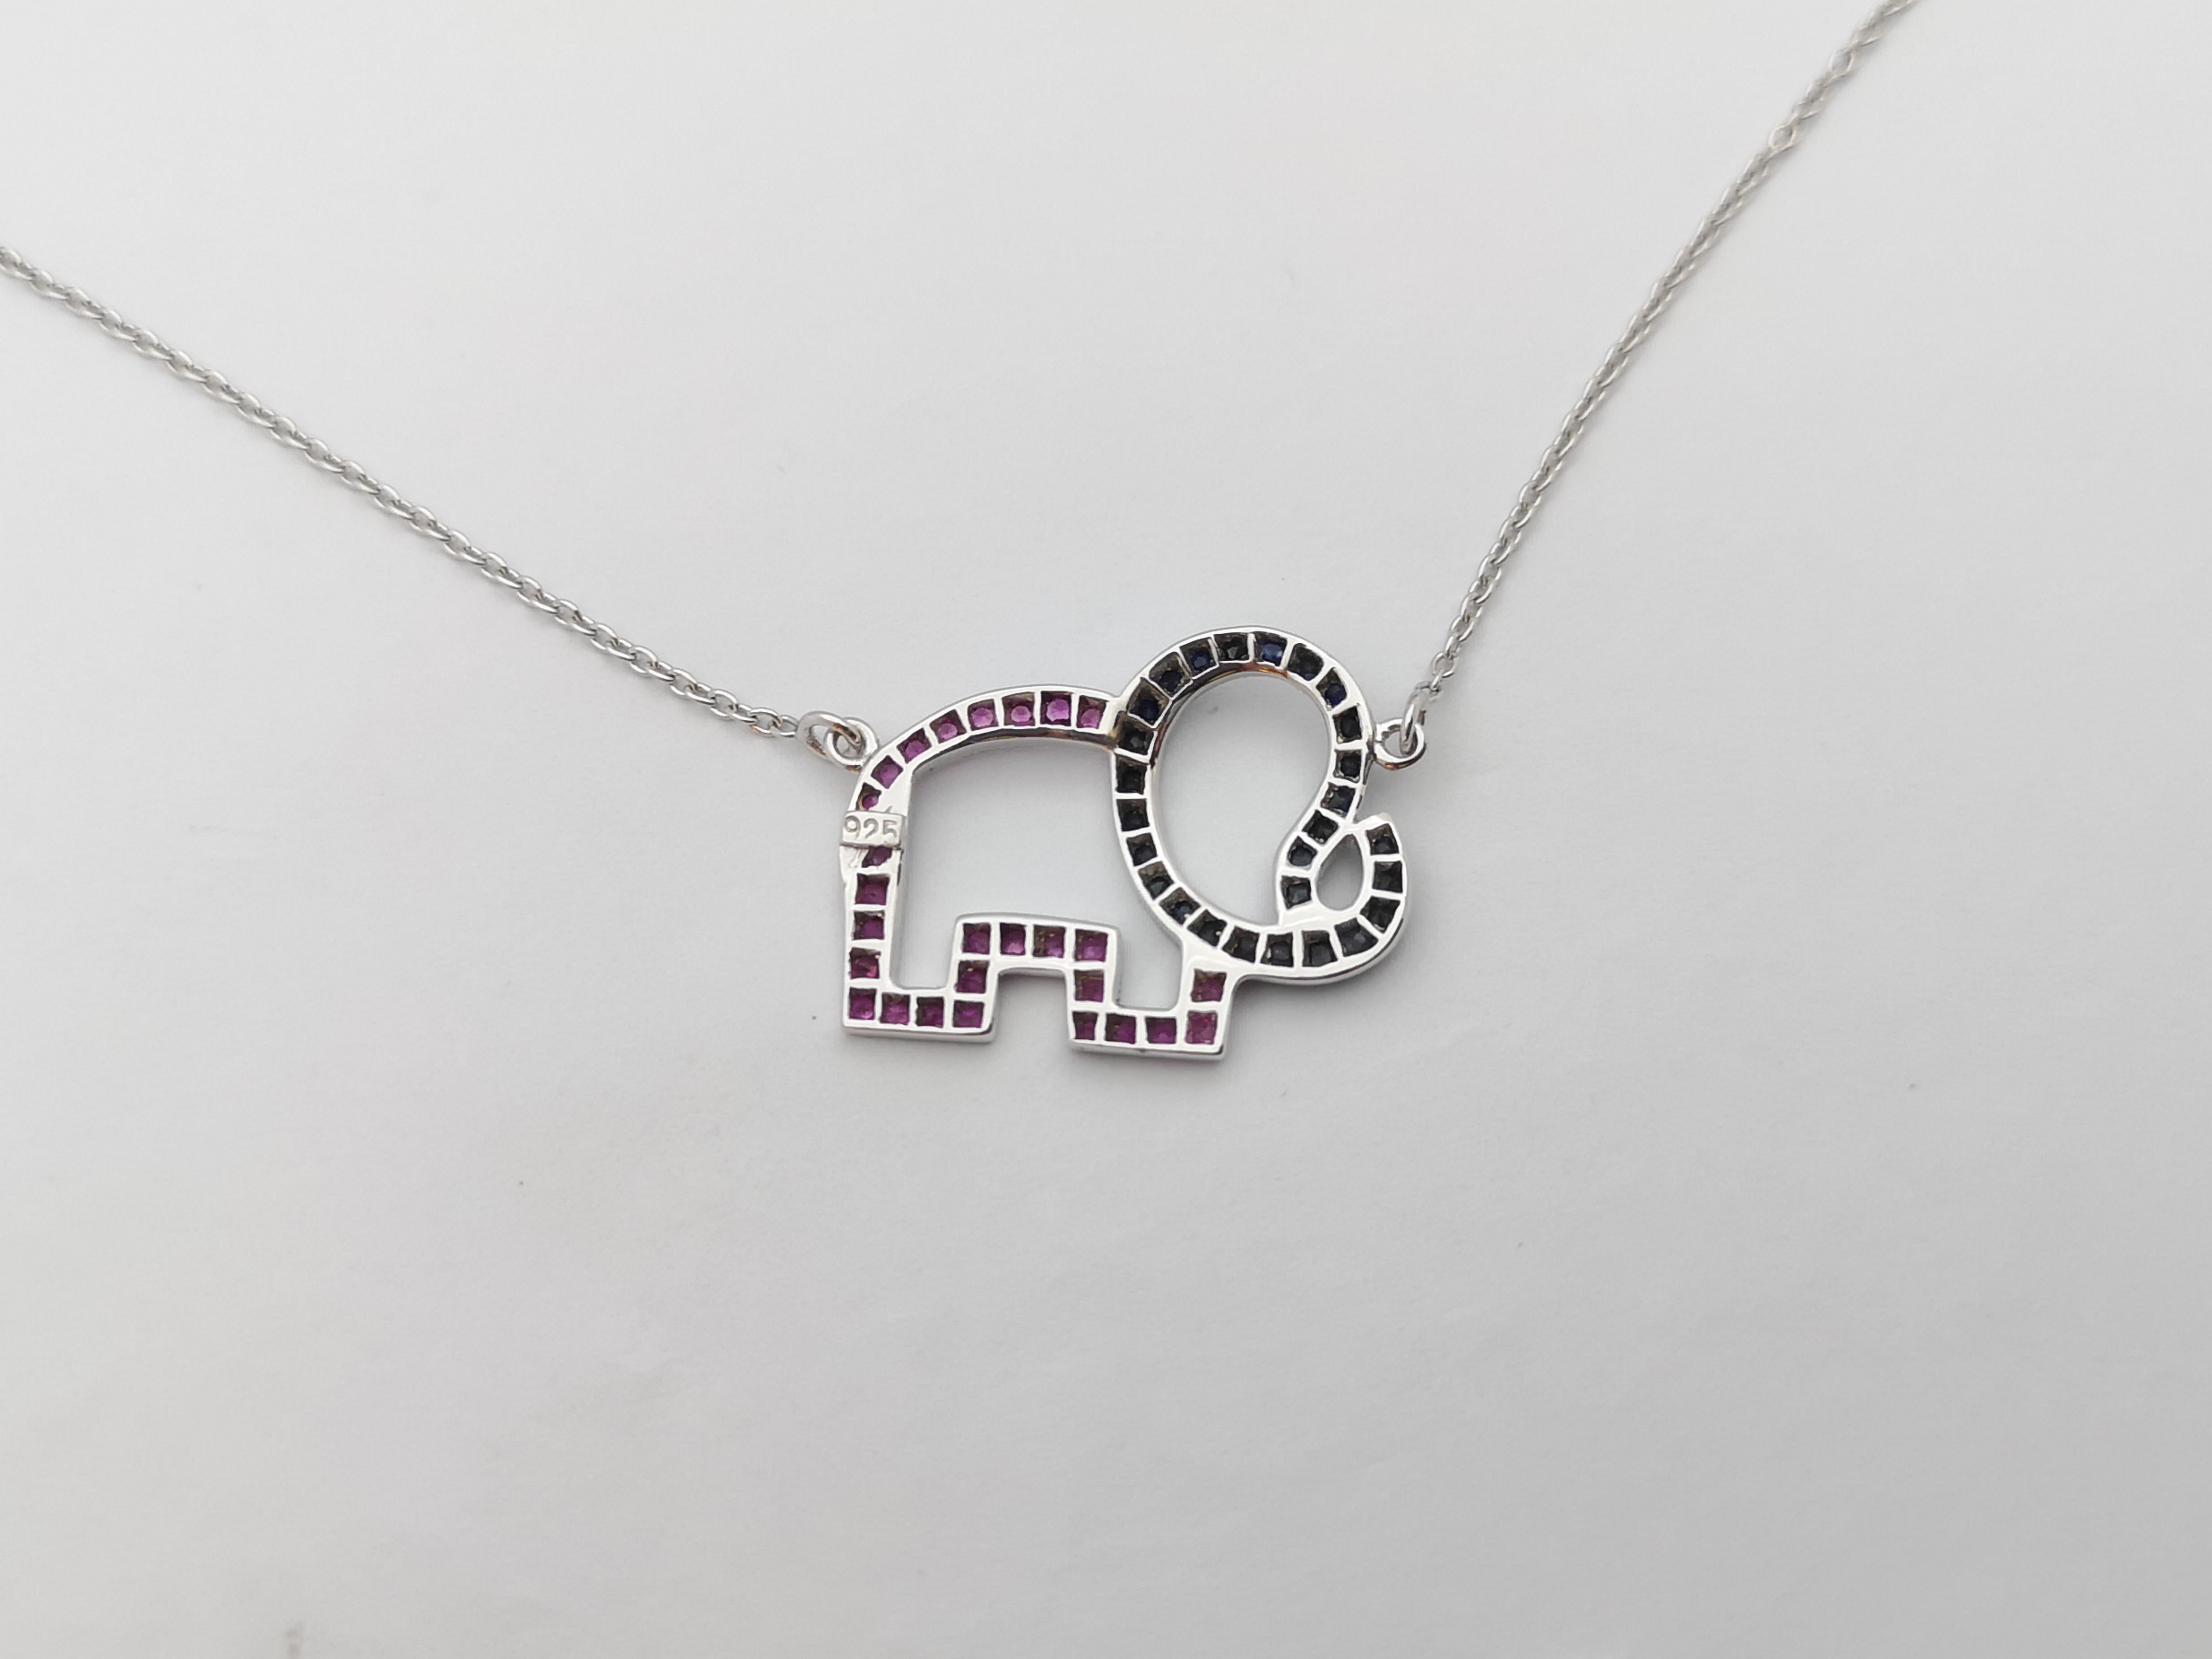 Pink Sapphire and Black Sapphire Necklace set in Silver Settings

Width:  1.9 cm 
Length:  45.5 cm
Total Weight: 3.31 grams

*Please note that the silver setting is plated with rhodium to promote shine and help prevent oxidation.  However, with the